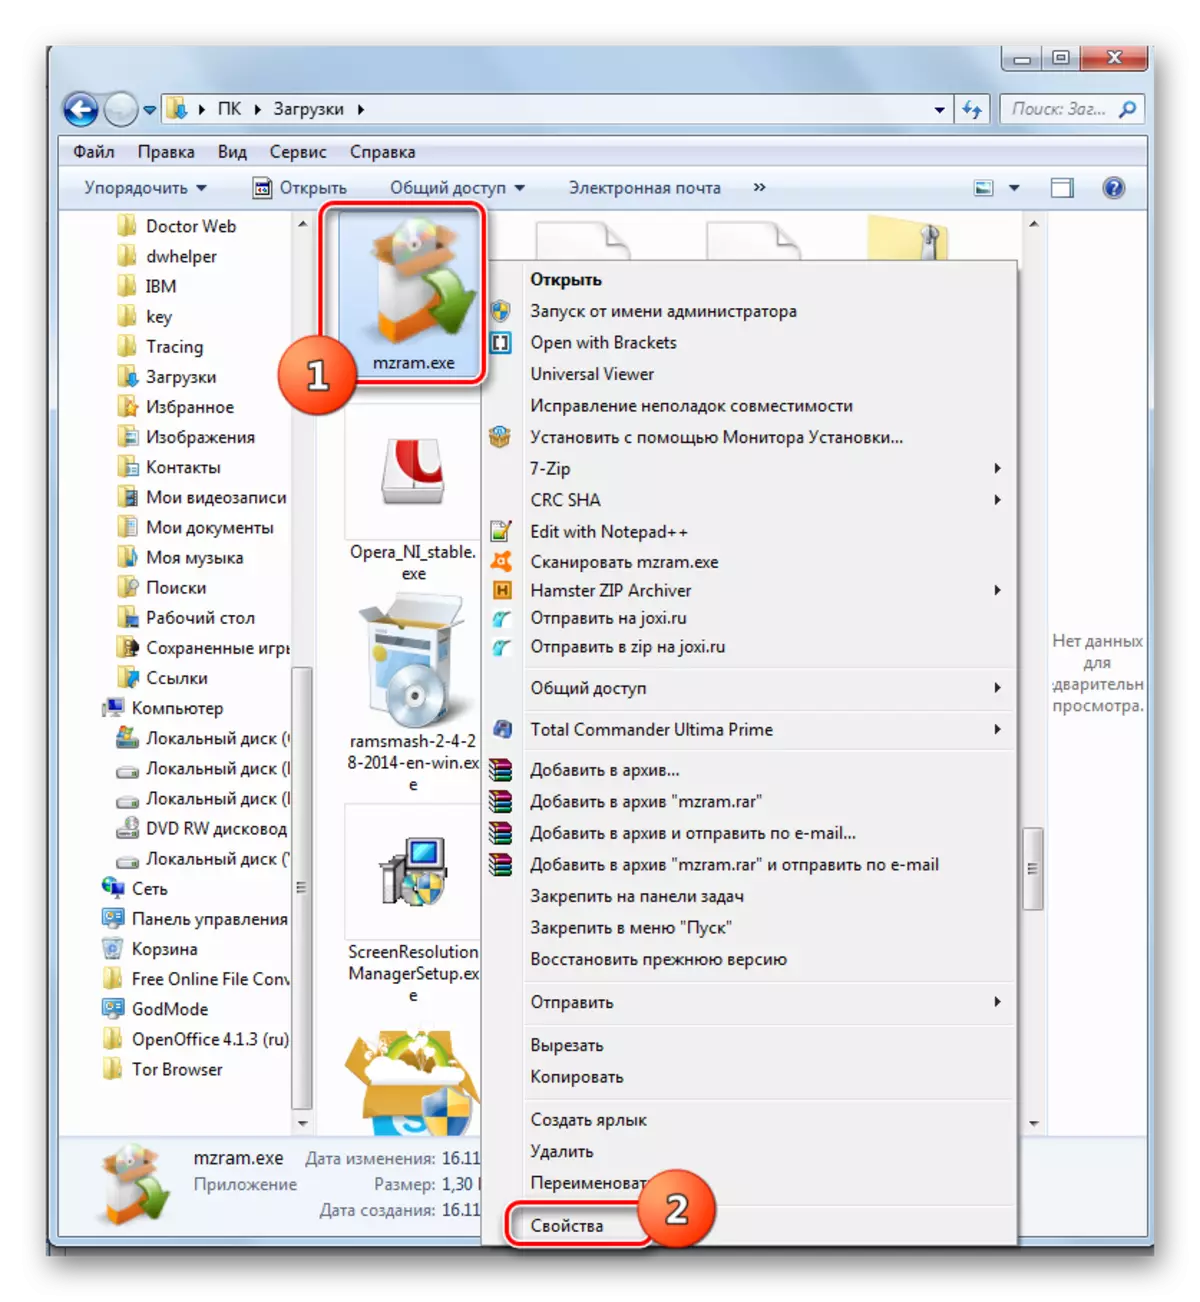 Switch file properties window through the context menu in Windows 7 conductor